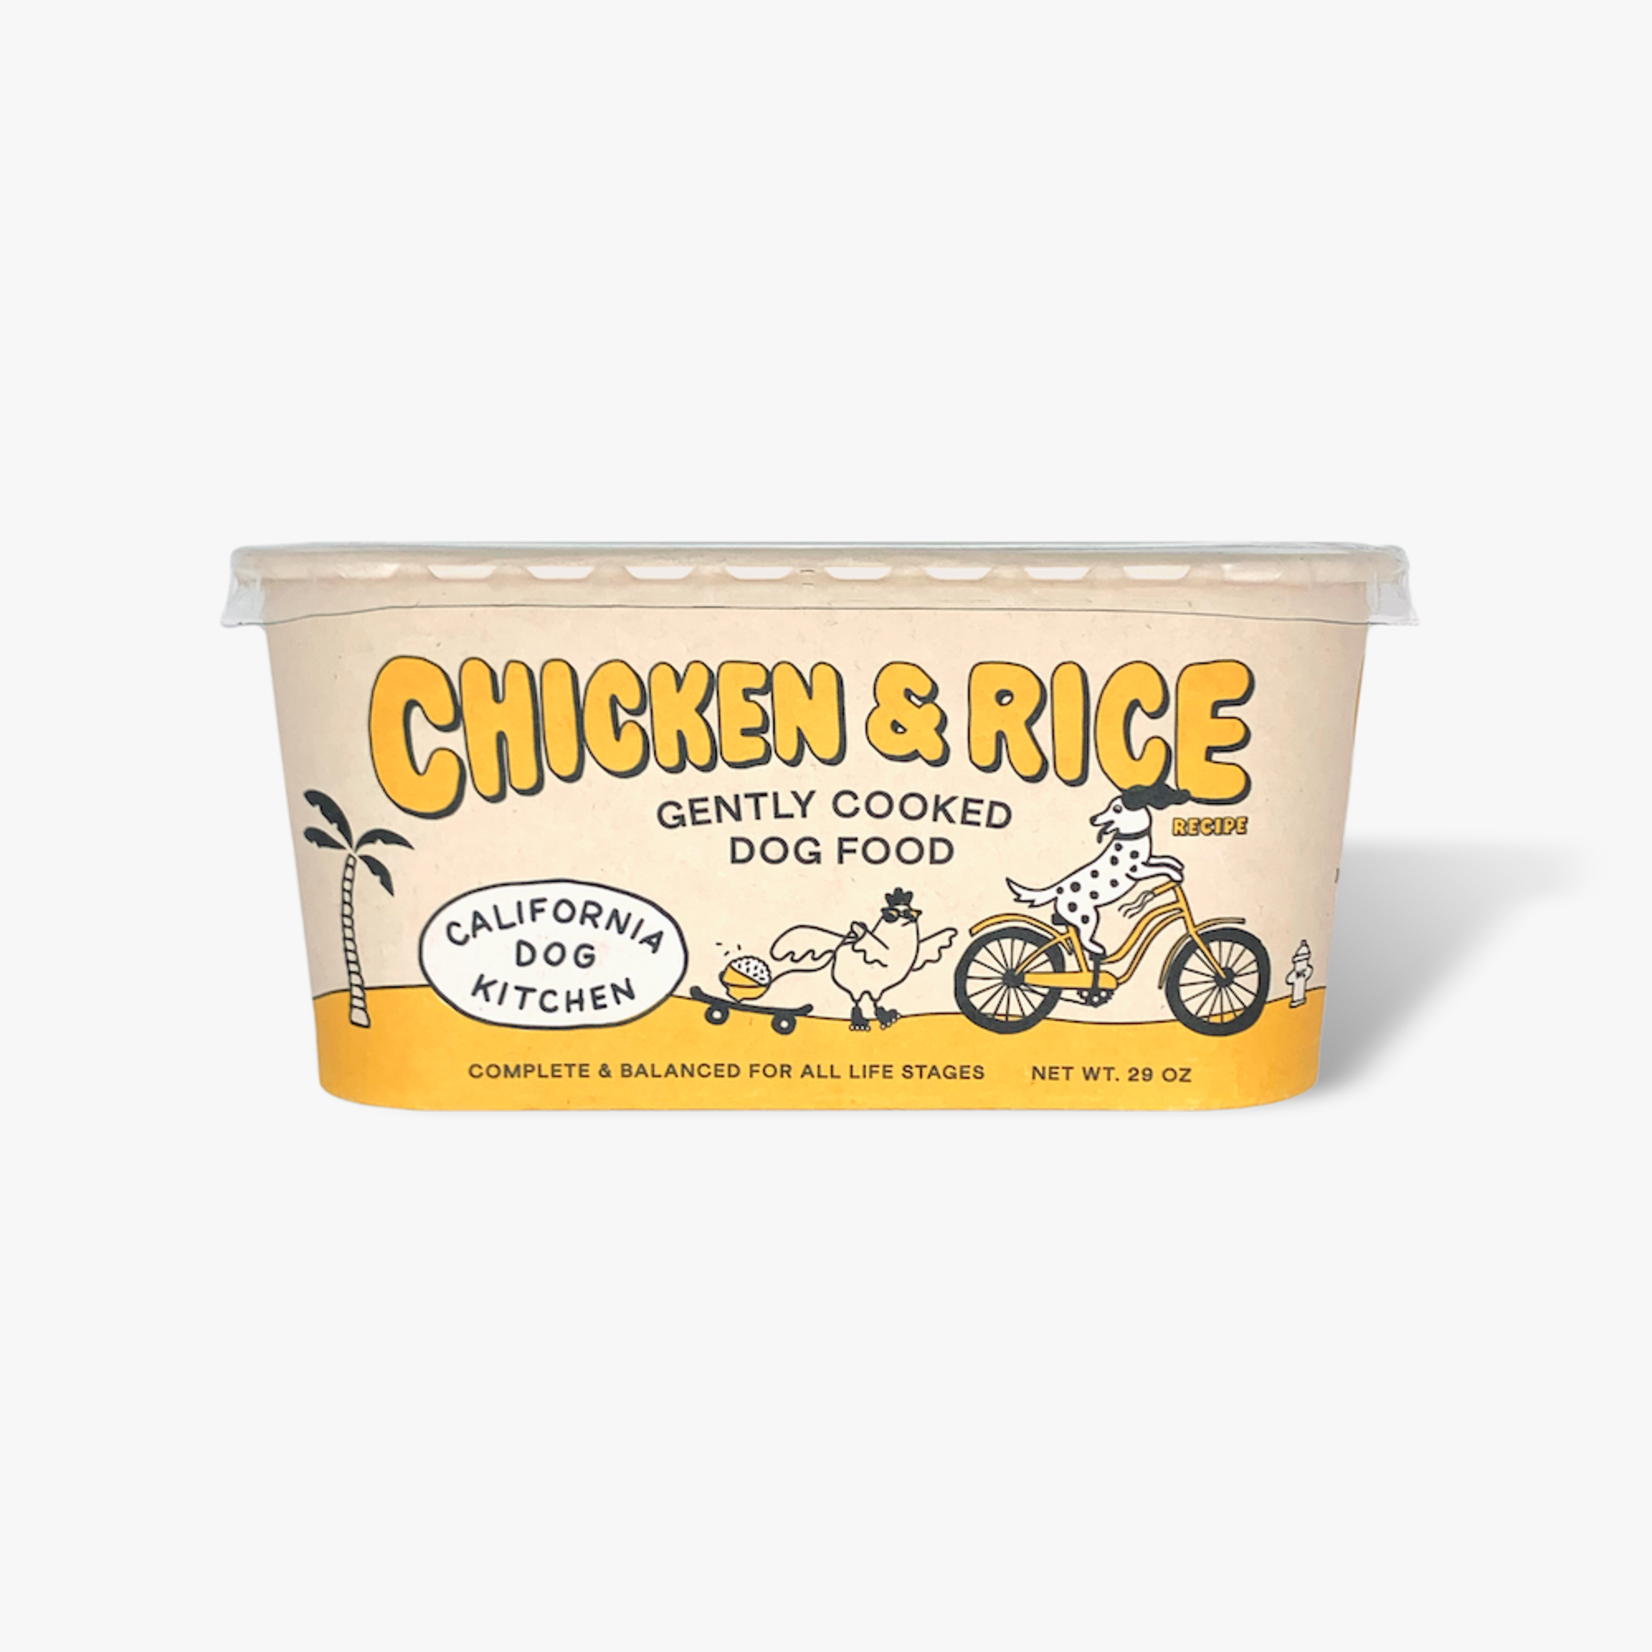 California Dog Kitchen California Dog Kitchen Gently Cooked Chicken & Rice Dog Food